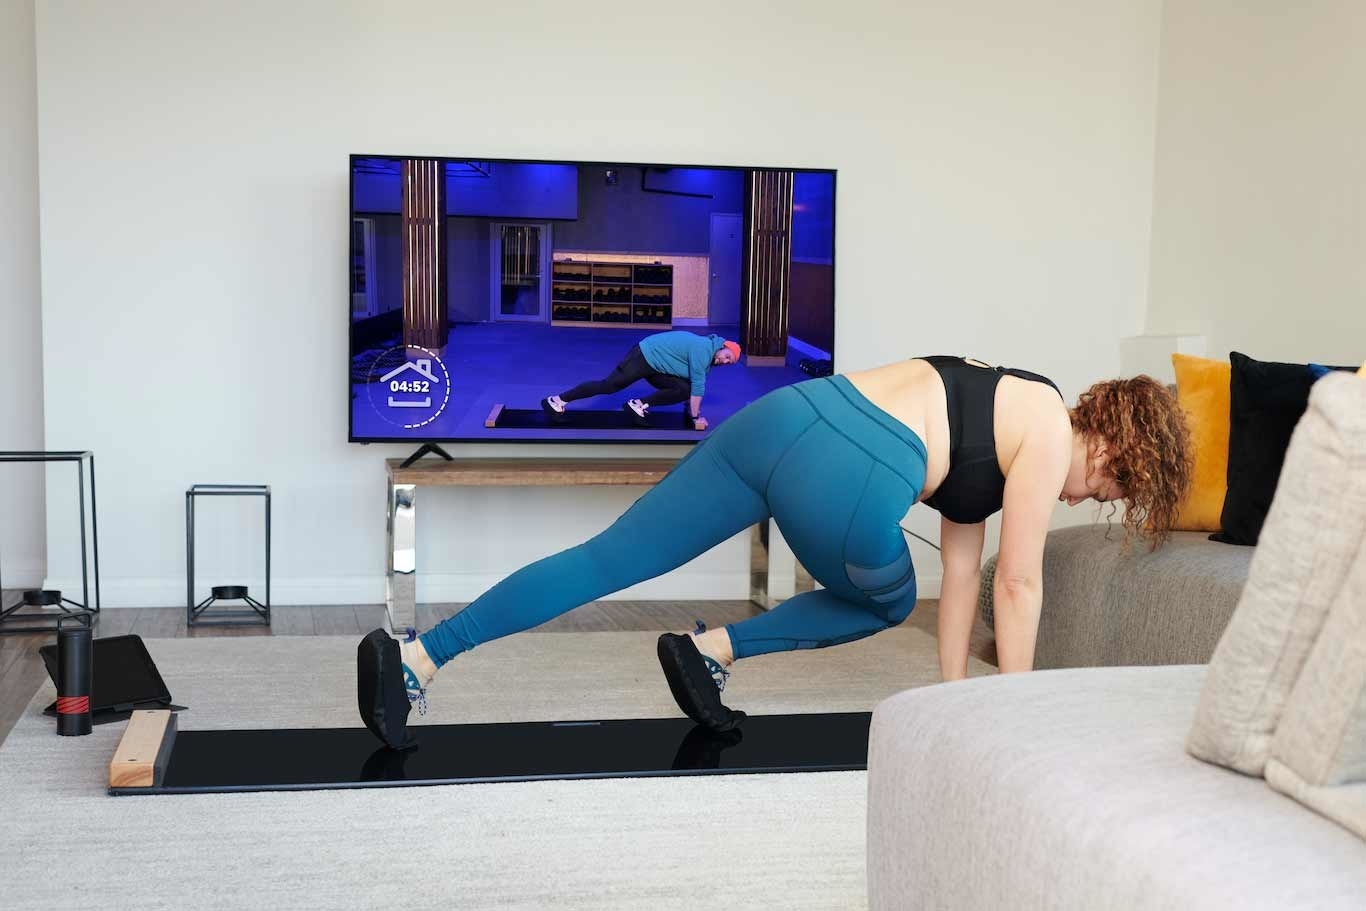 model performs a plank sliding movement on the Brrrn board